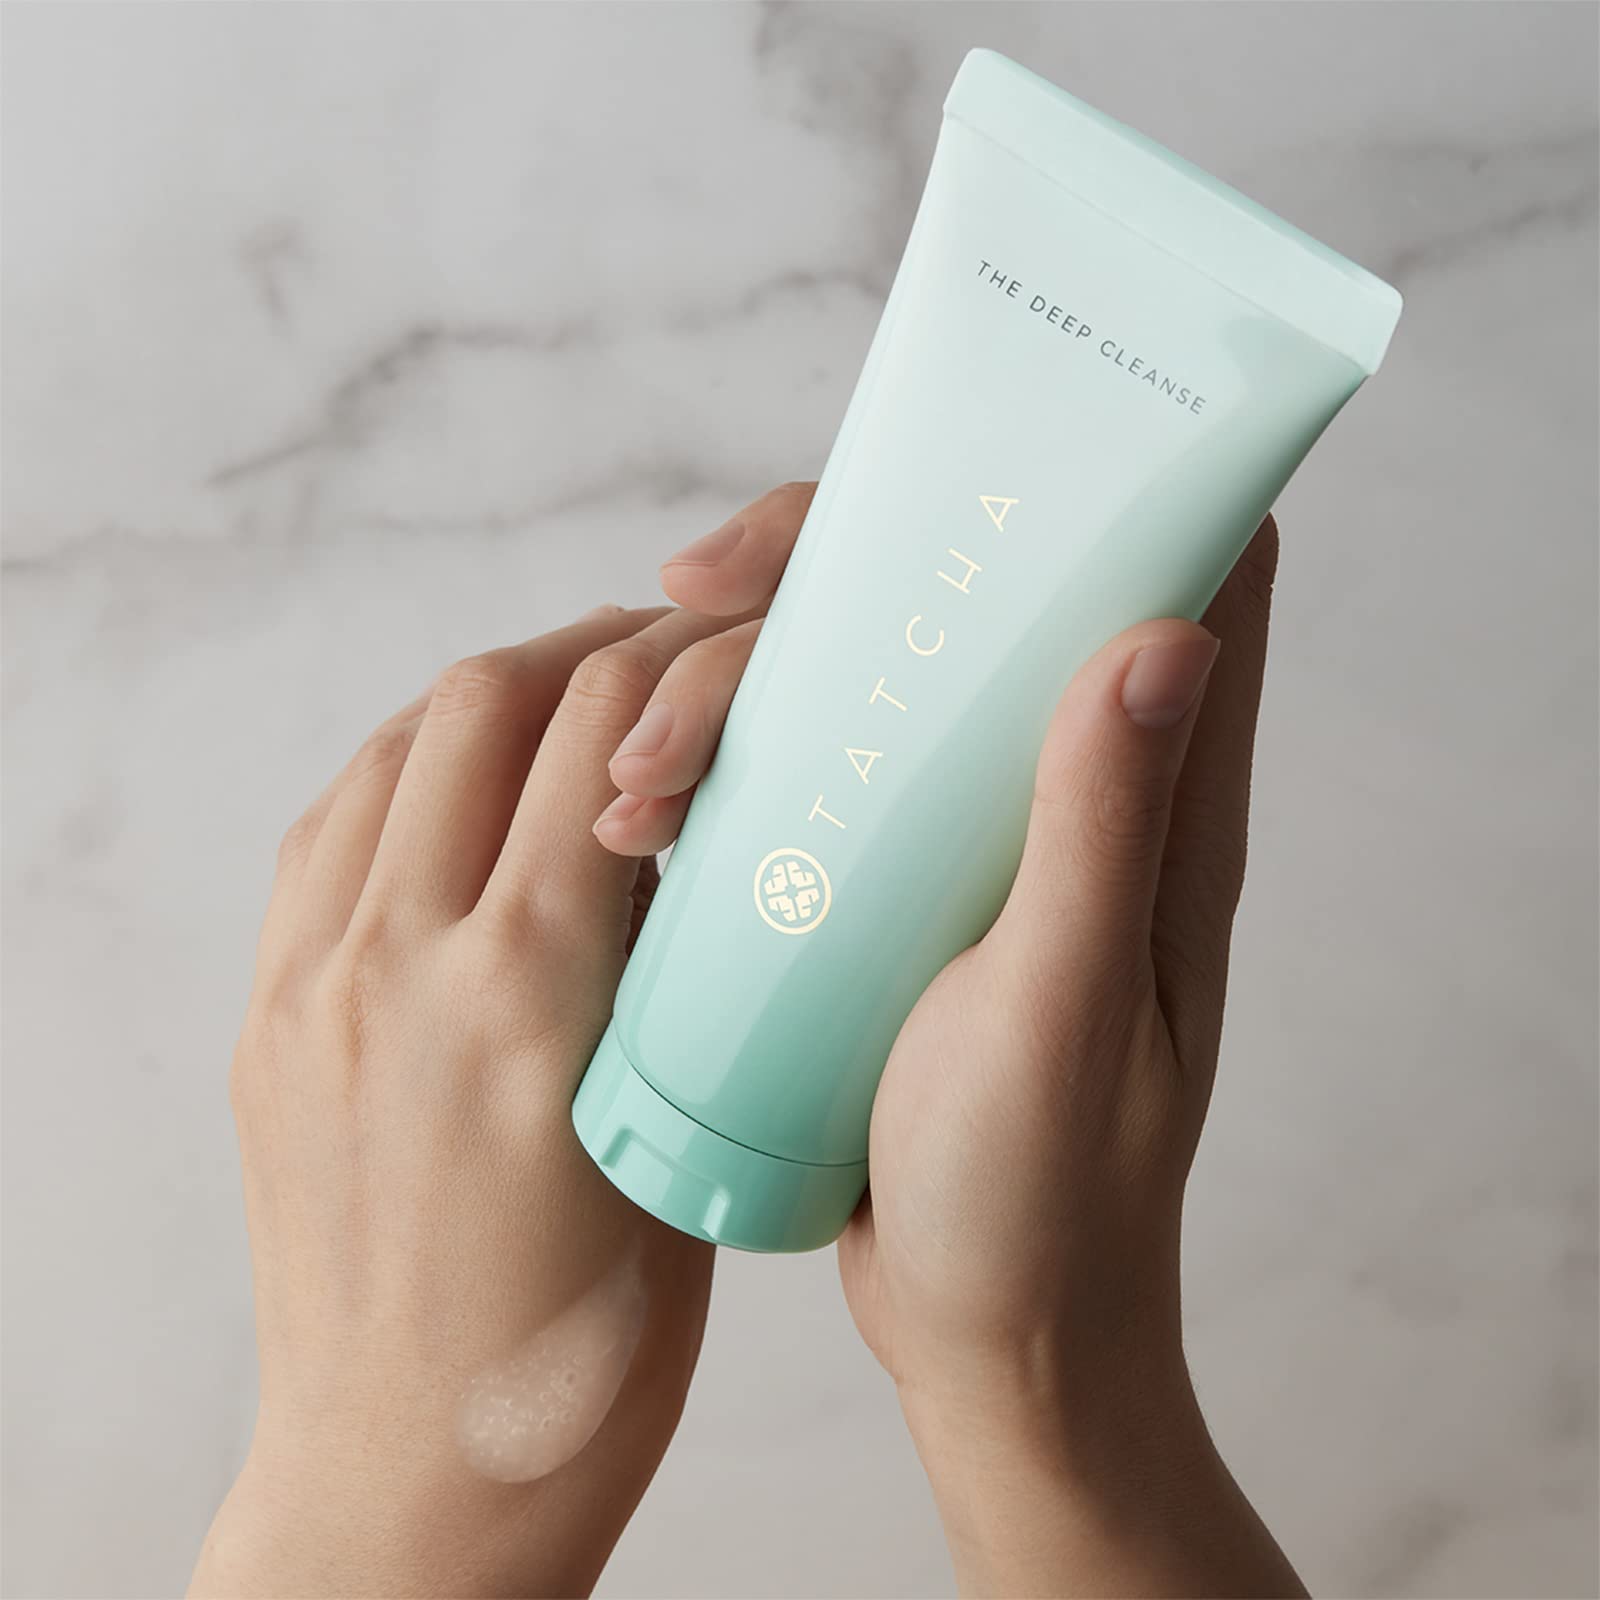 TATCHA The Deep Cleanse | Deep, Gentle Exfoliating Cleanser, Lifts Dirt, Minimizes Excess Oil & Unclogs & Tightens Pores